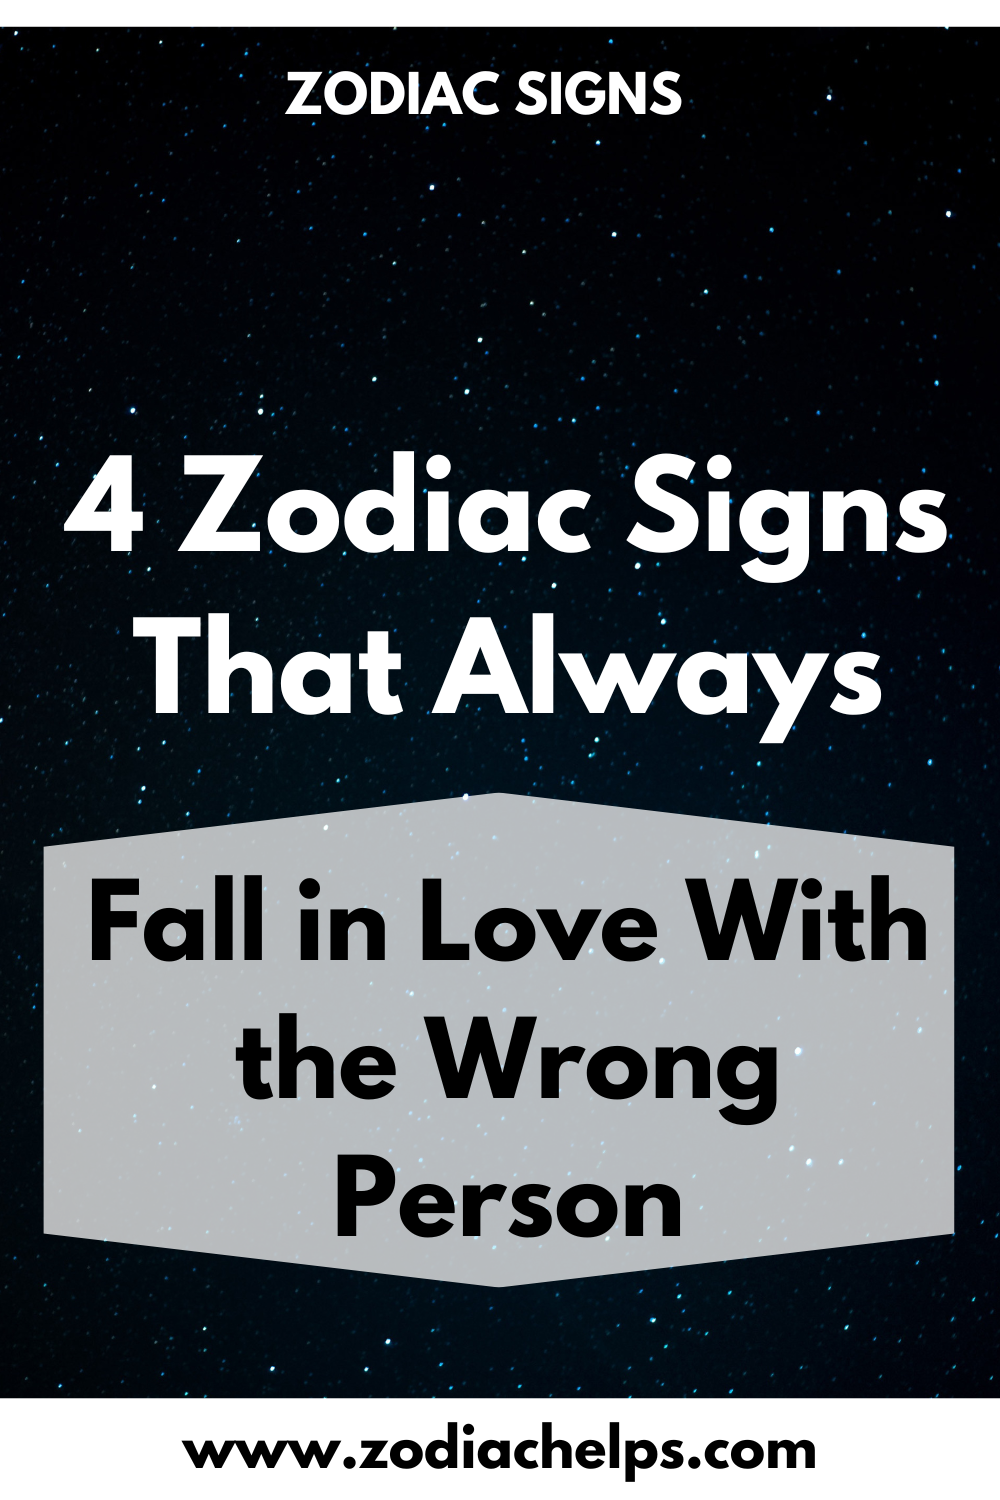 4 Zodiac Signs That Always Fall in Love With the Wrong Person